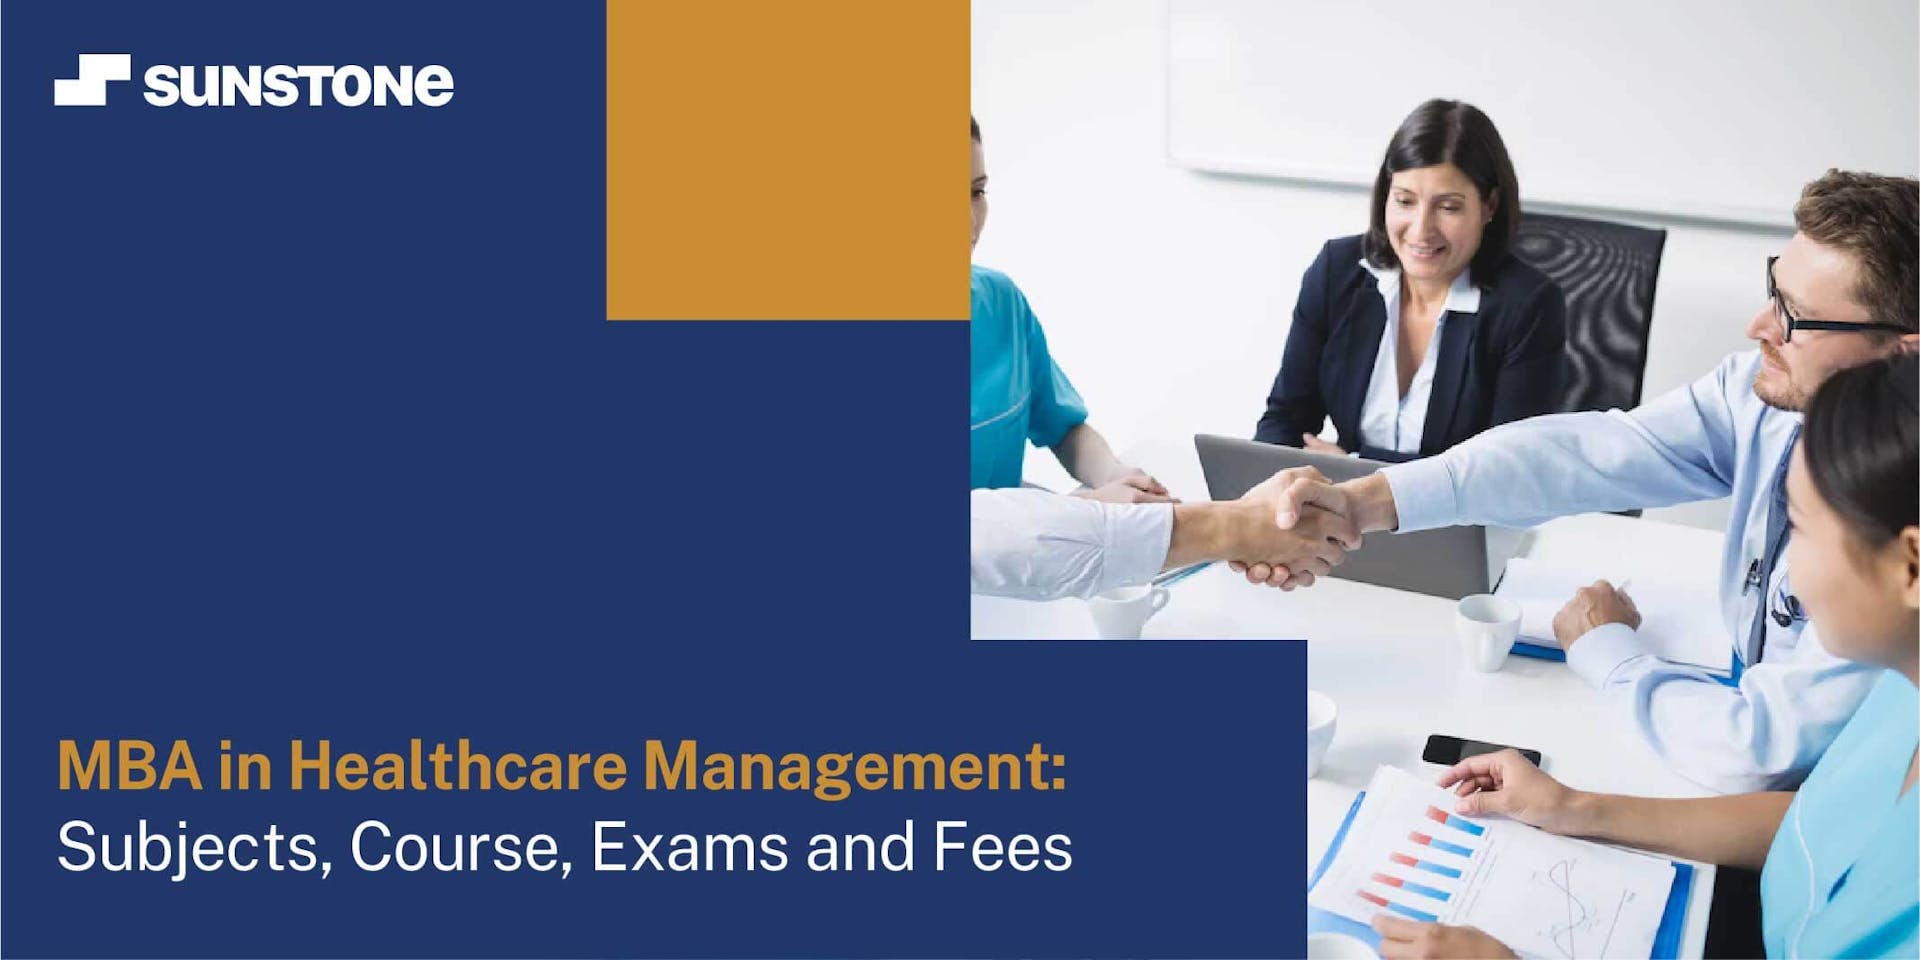 MBA in healthcare management - subjects, course, exams, fees